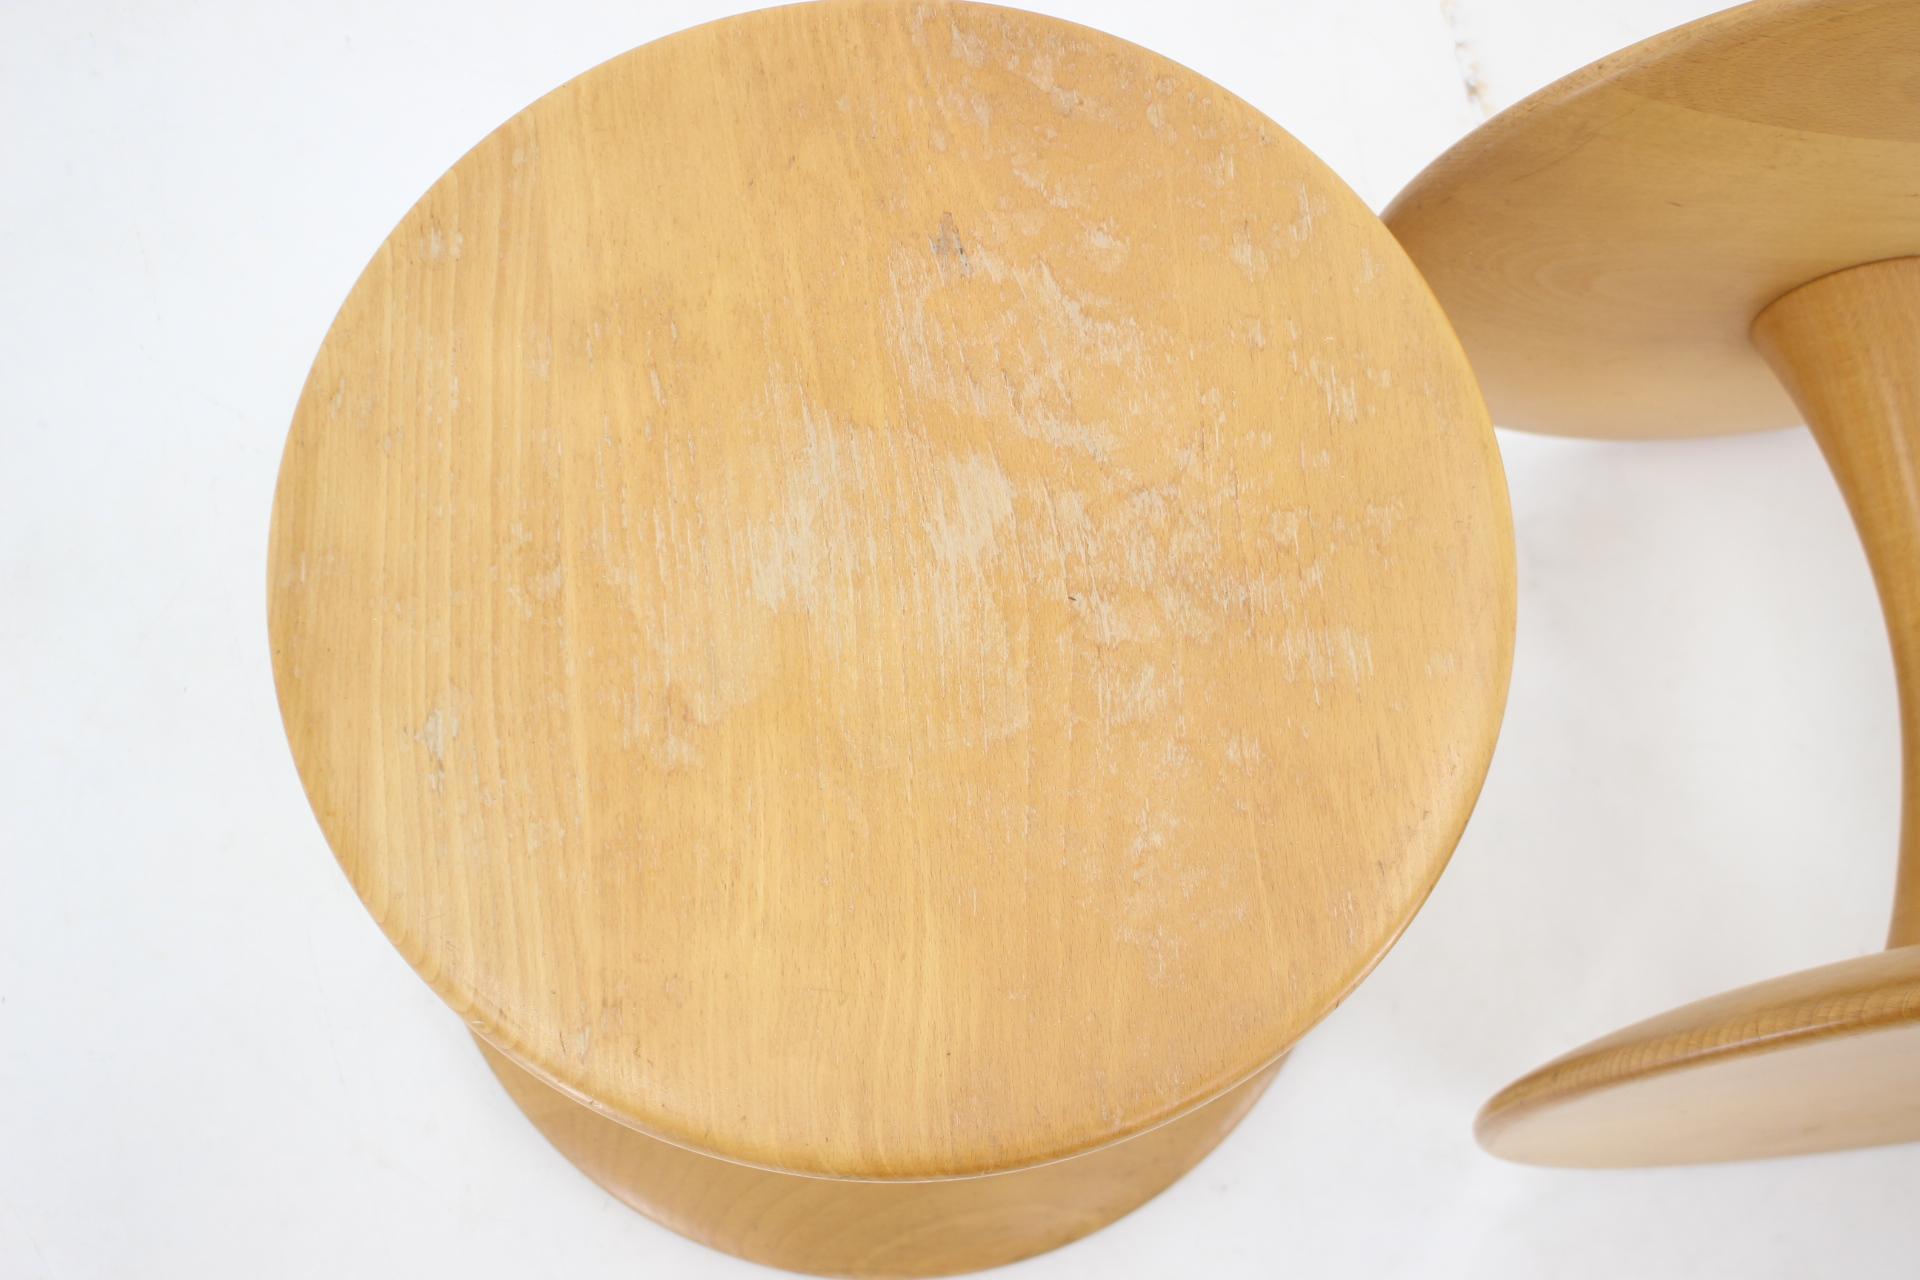 1960s Pair of Nanna Ditzel Beech Stools by Kolds Savværk, Denmark In Good Condition For Sale In Praha, CZ